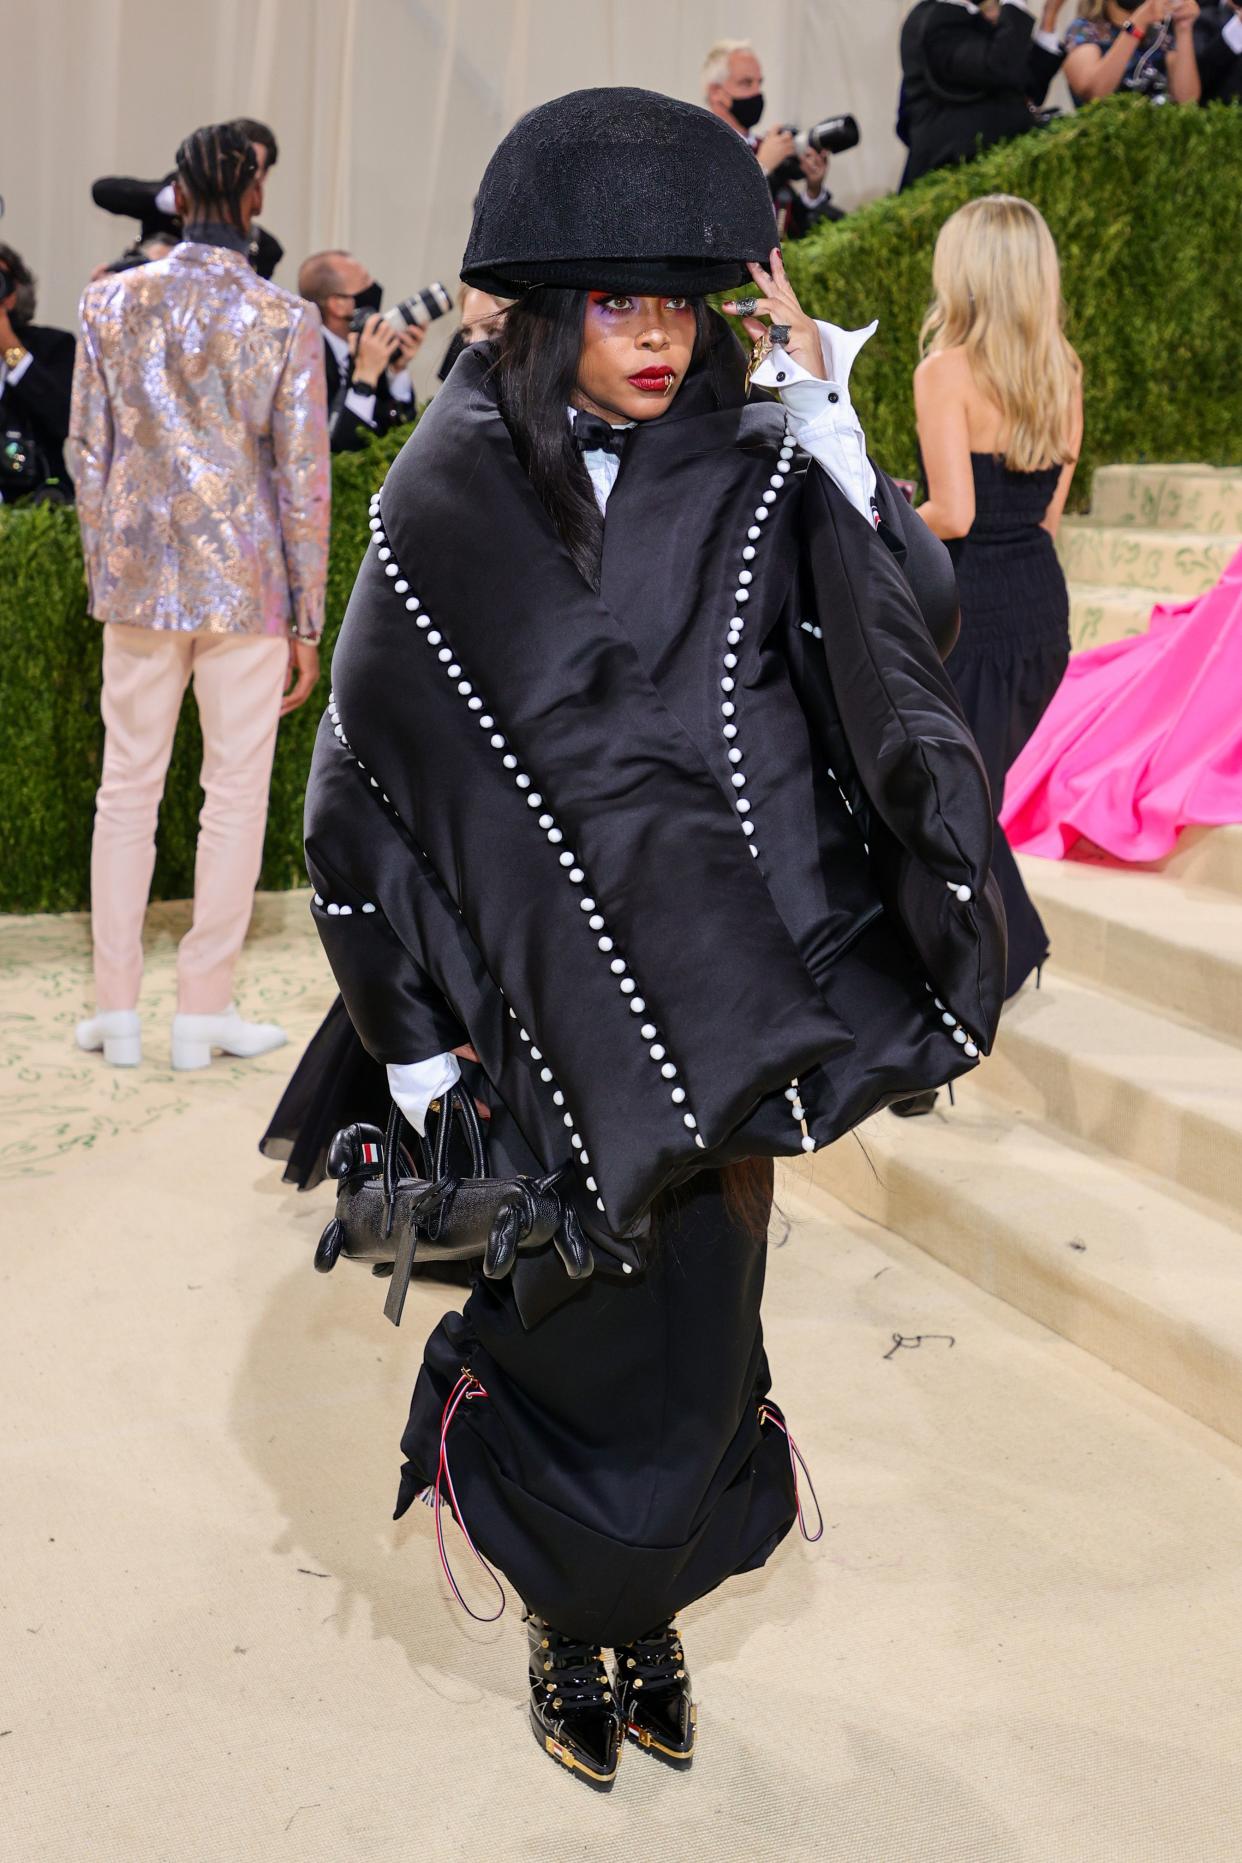 Erykah Badu attends The 2021 Met Gala Celebrating In America: A Lexicon Of Fashion at Metropolitan Museum of Art on Sept. 13, 2021 in New York.